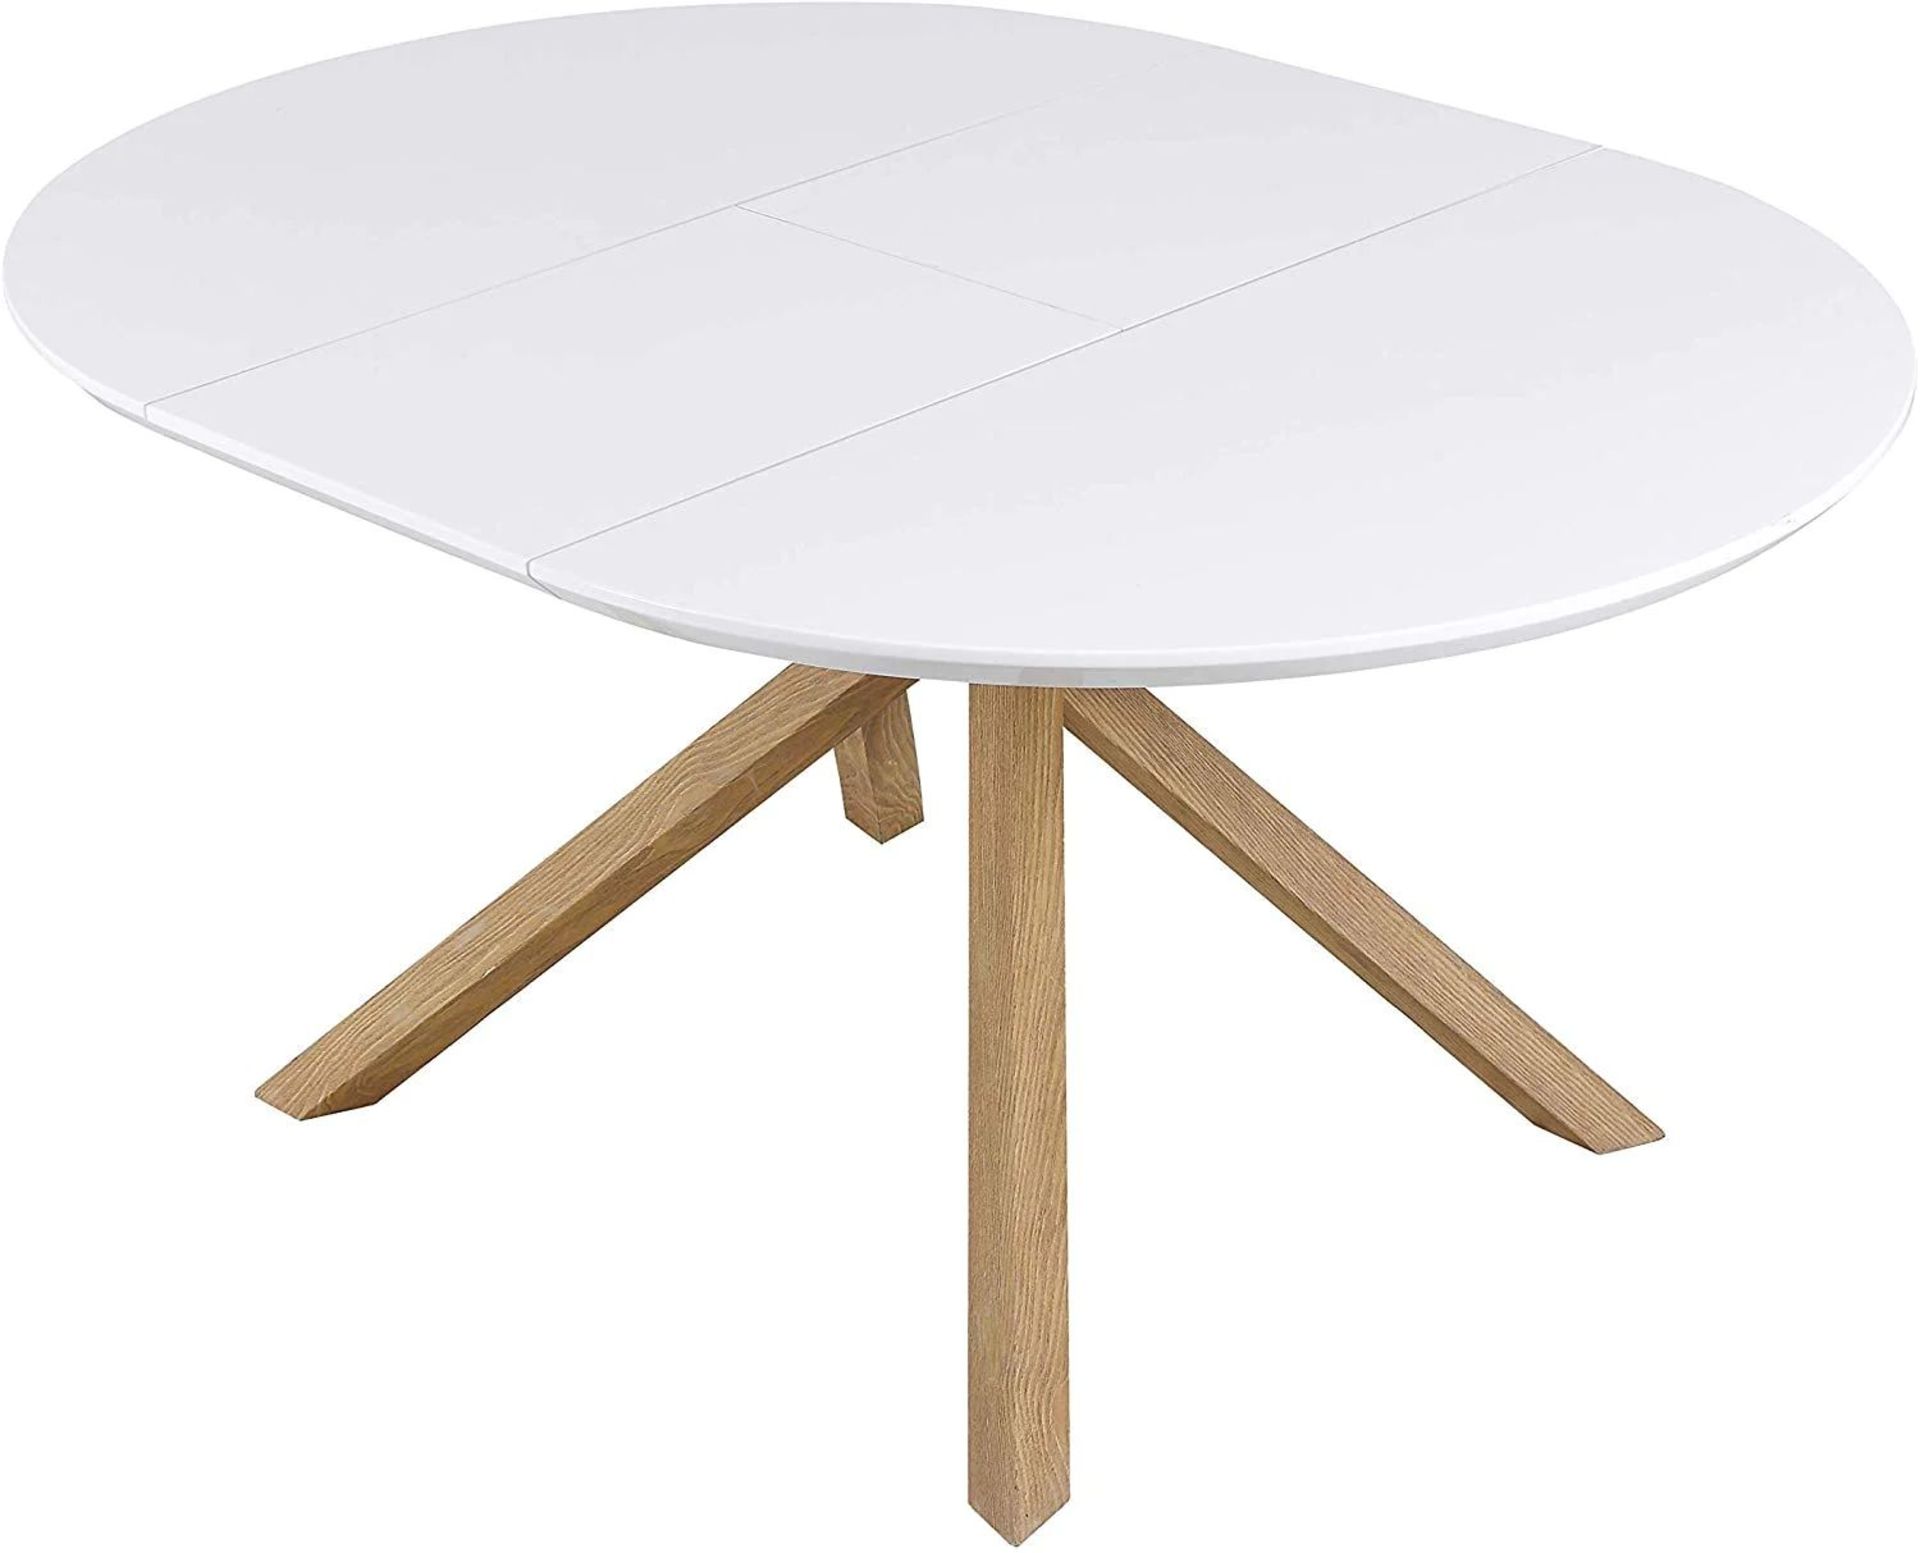 Grenchen Round to Oval 4 to 6-Seater White High Gloss Extendable Dining Table. - BI. RRP £419.99. - Image 2 of 2